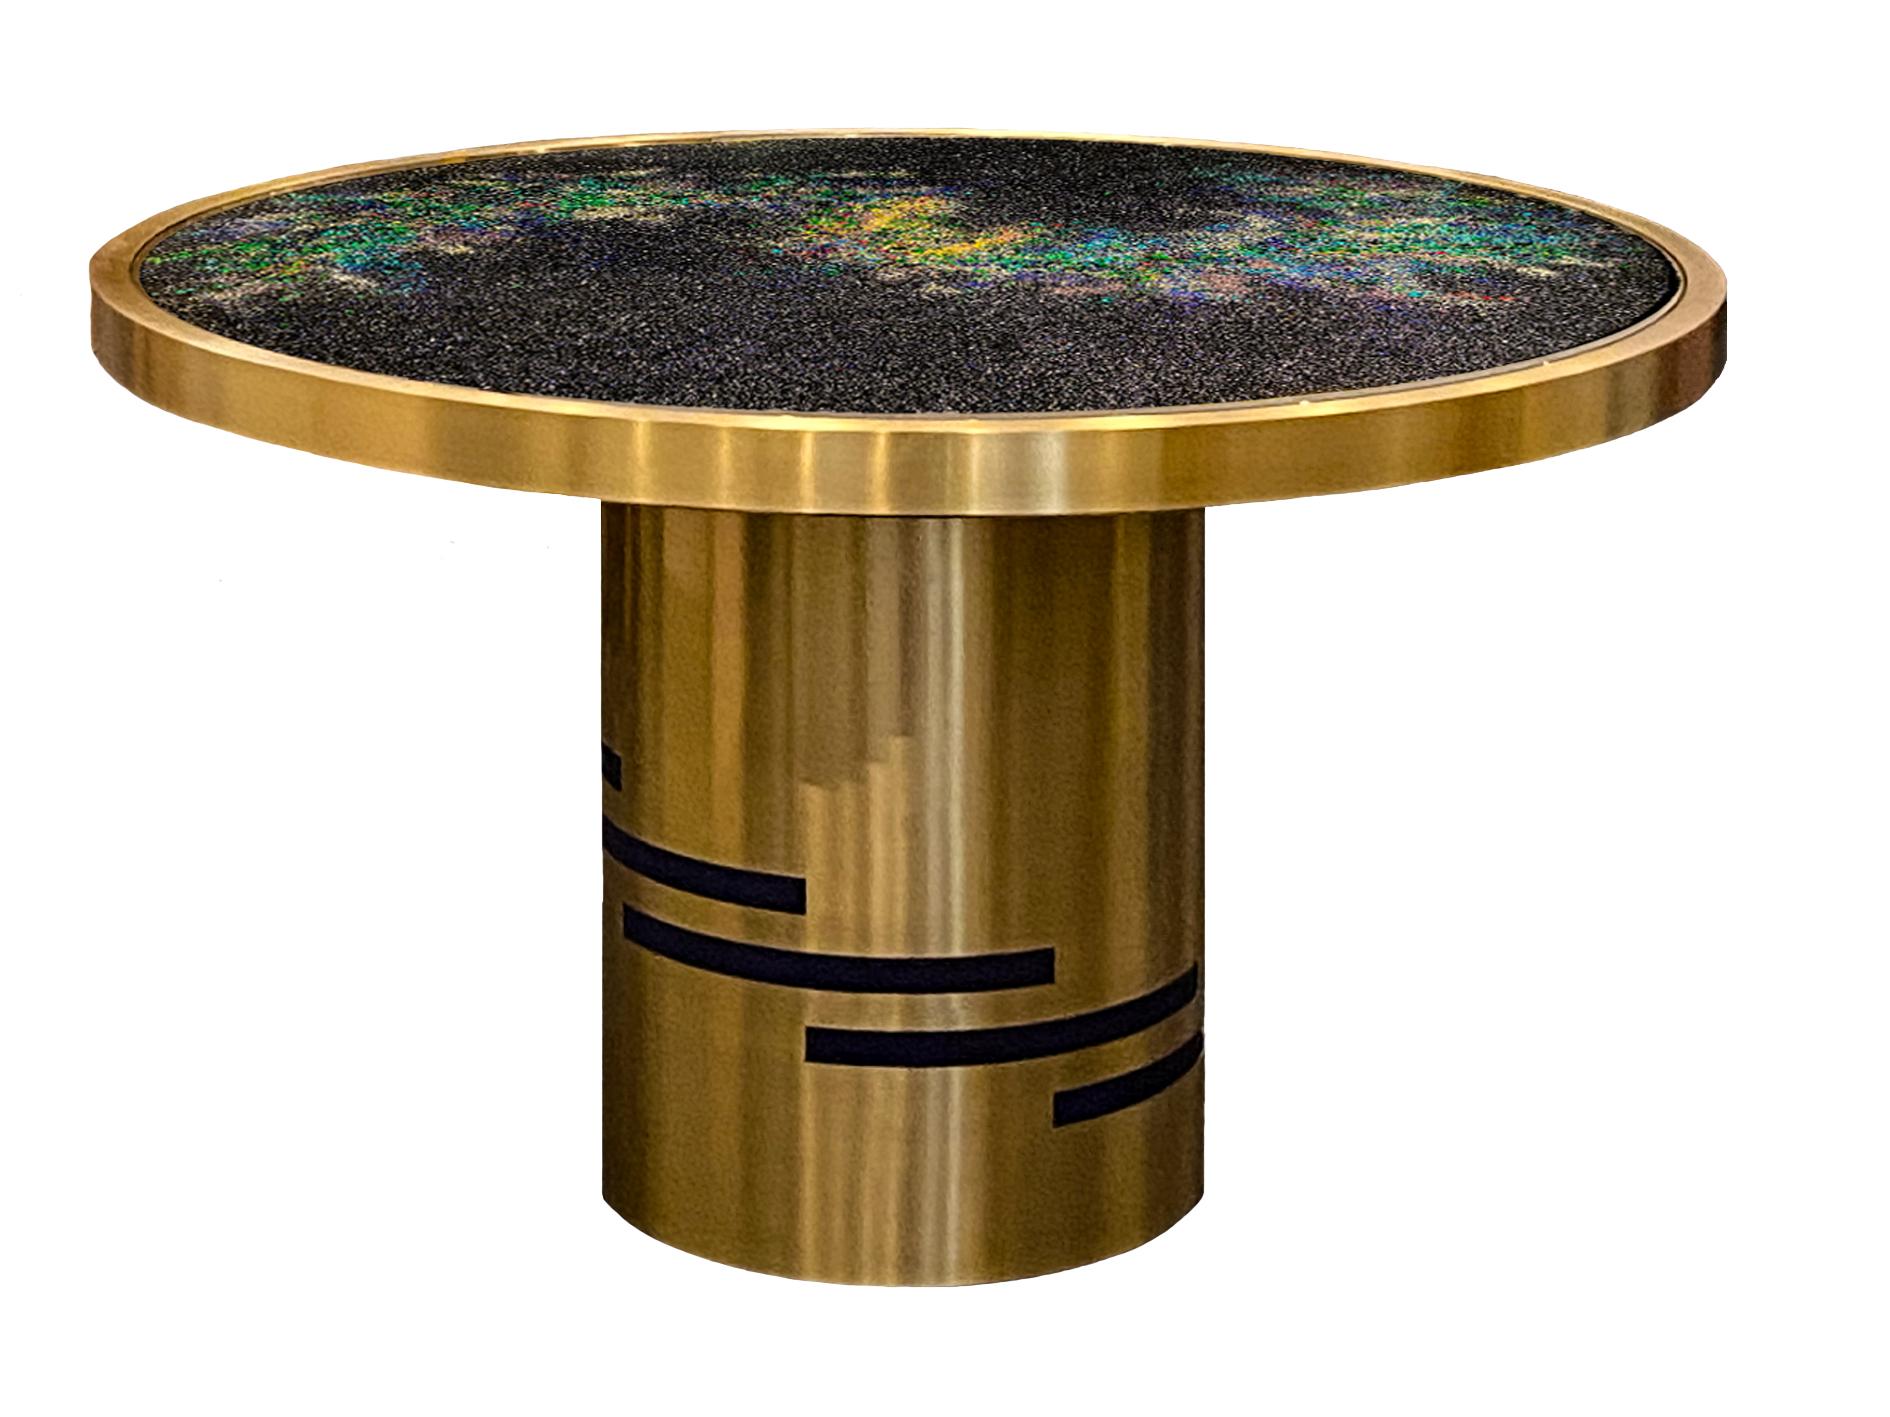 L’UNIVERSO” is a one-of-a-kind table, designed and manufactured by KalaRara. The tabletop is completely made of crushed Murano glass and acrylic. An inset extra-clear tempered glass panel covers the tabletop inset in a brushed finished brass frame